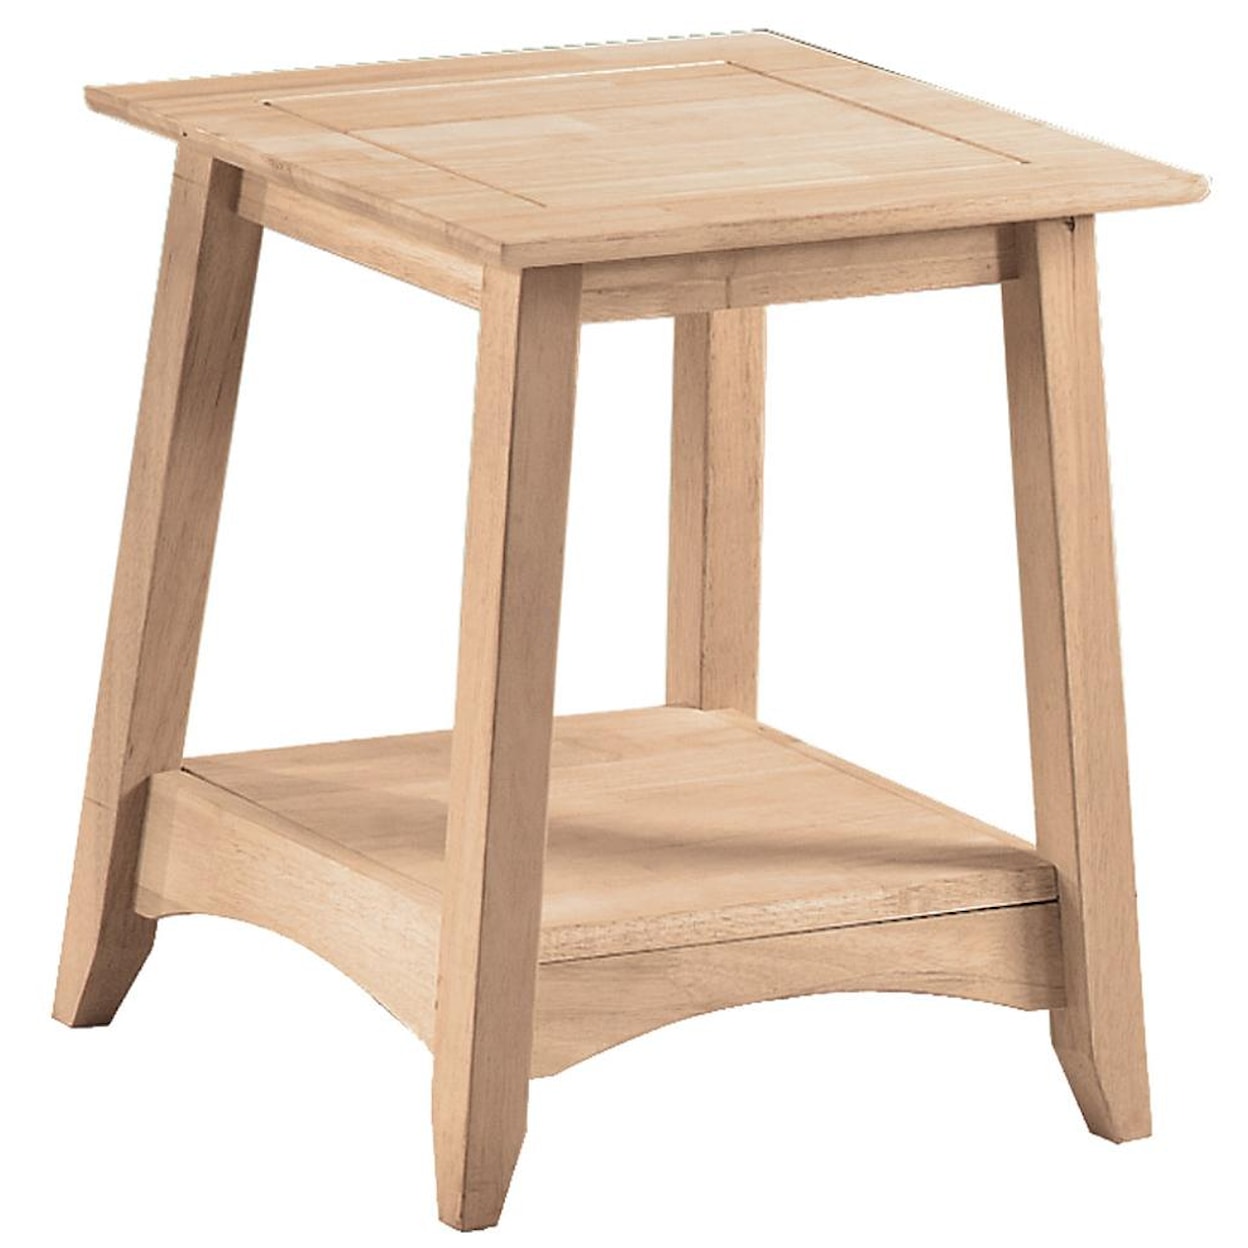 John Thomas SELECT Occasional & Accents Bombay End Table